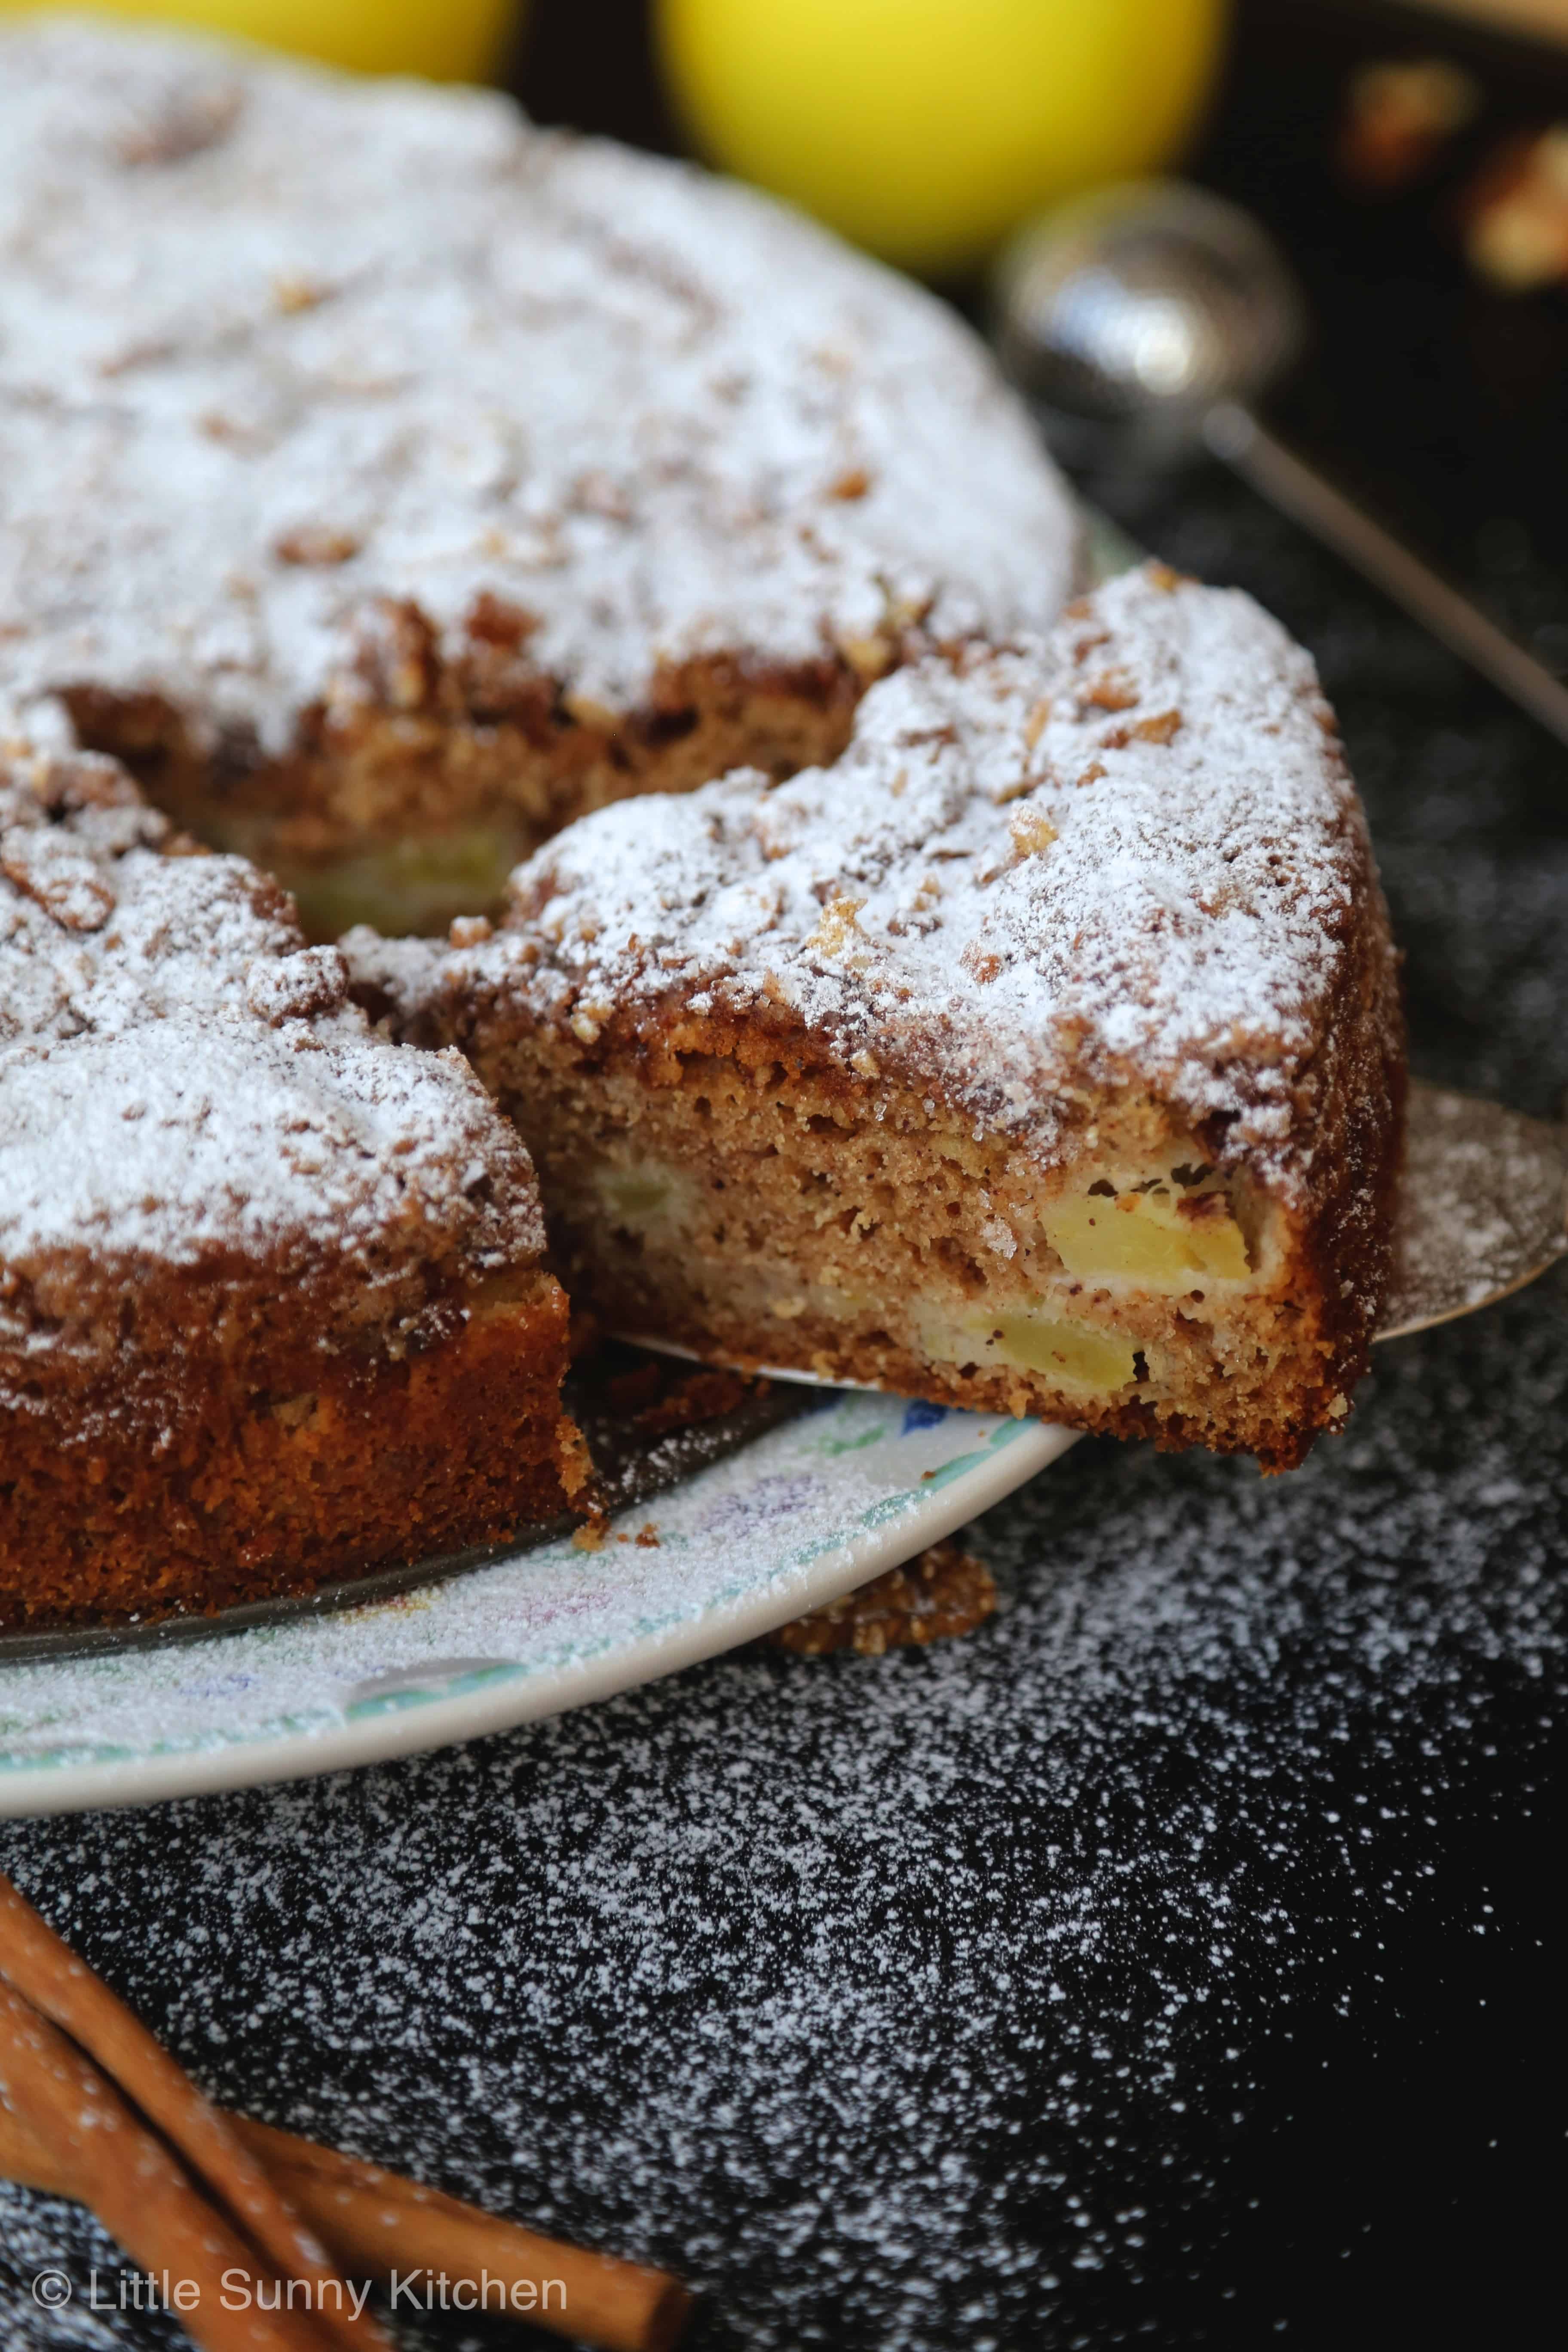 Cutting a slice of apple Sharlotka cake topped with powdered sugar.